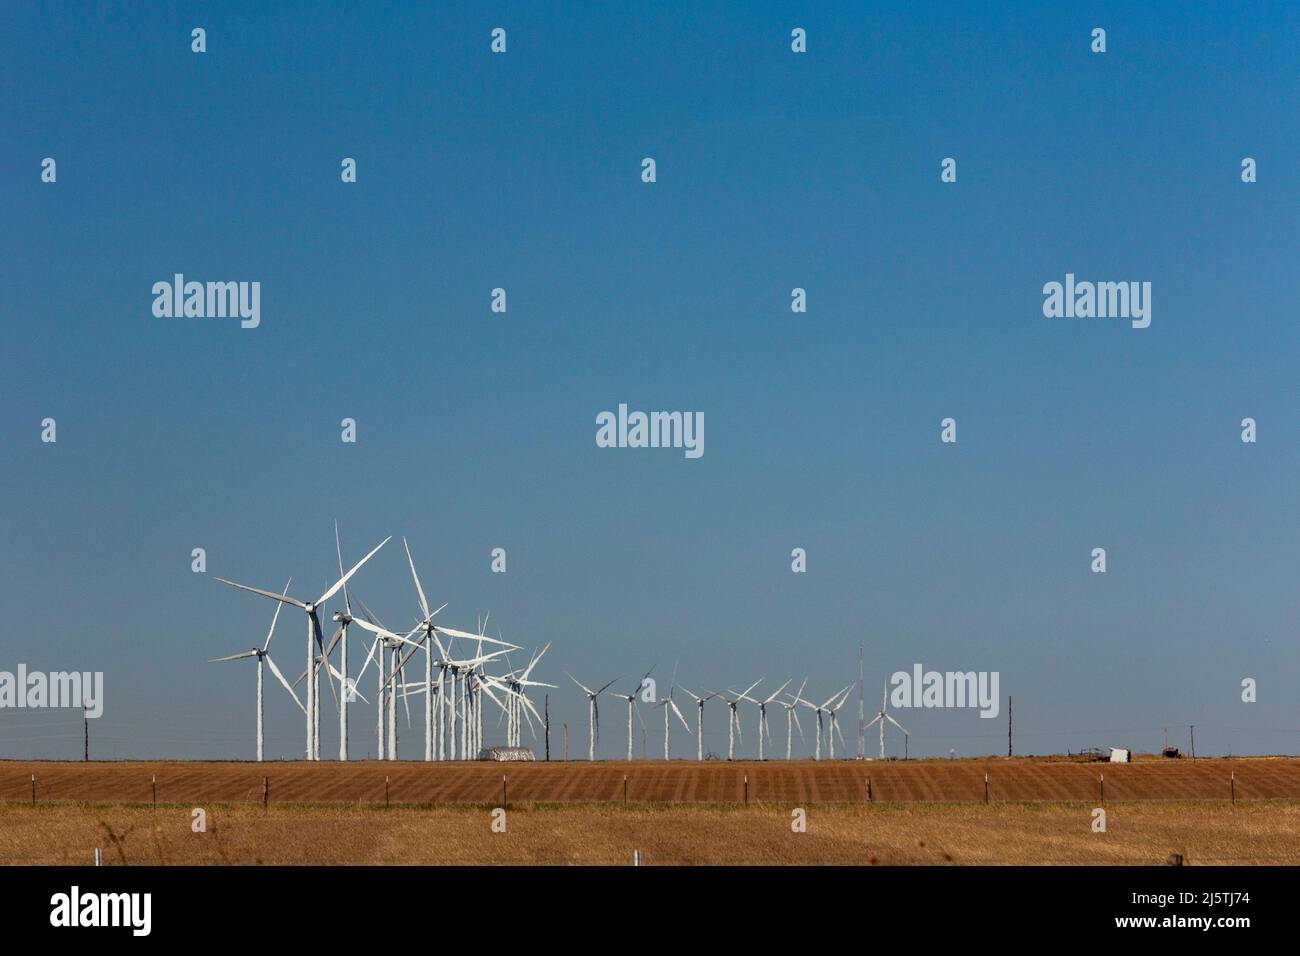 Conway, Texas - A wind farm in the Texas panhandle, east of Amarillo. Stock Photo